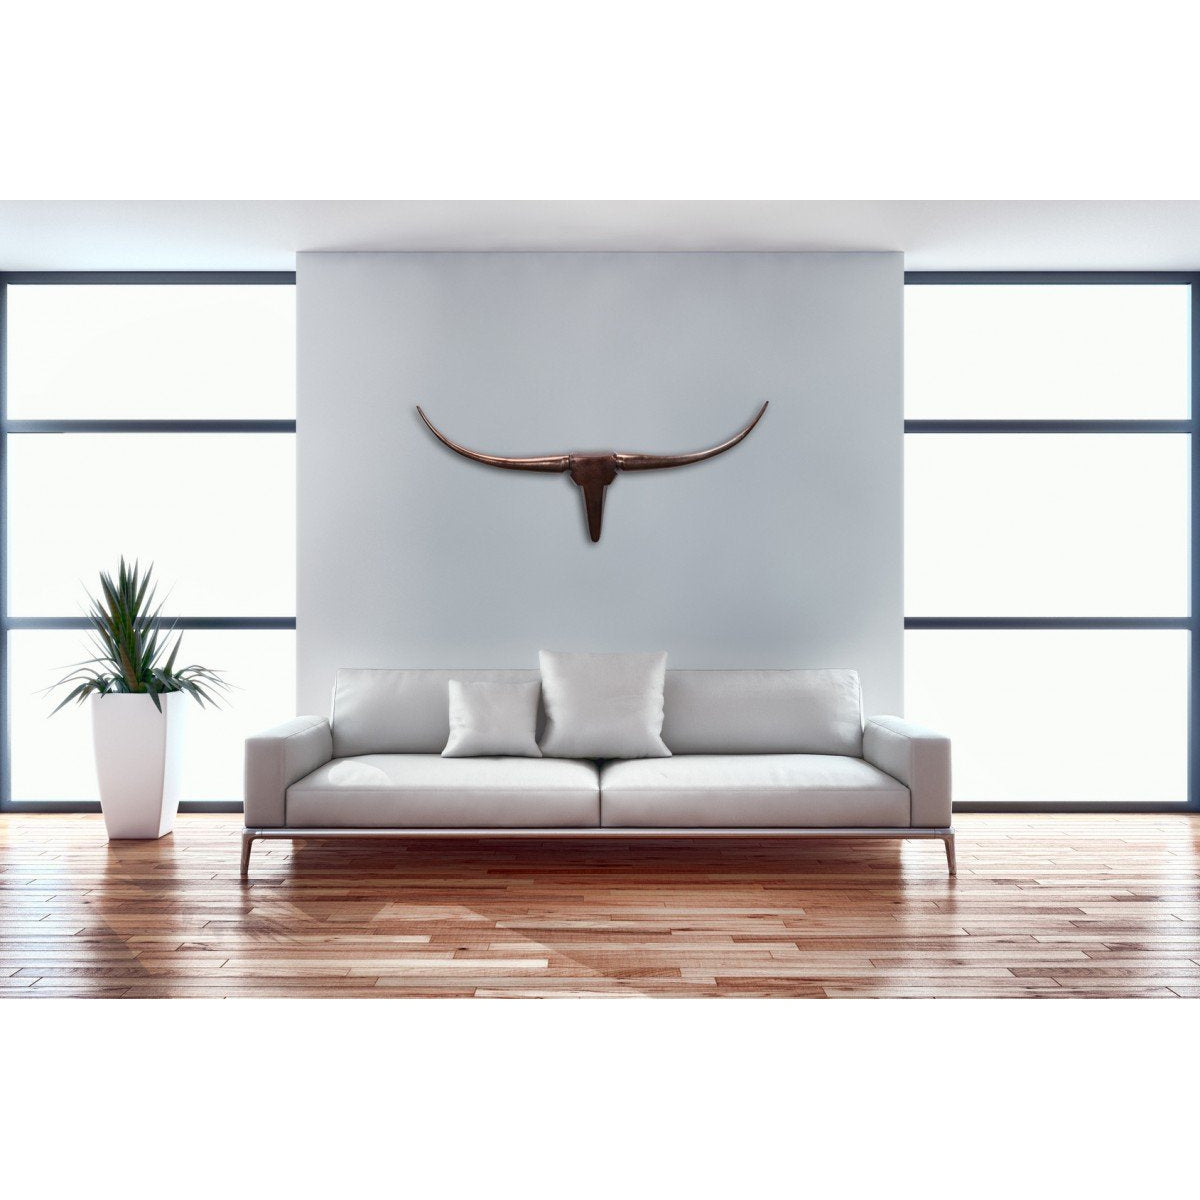 Nancy's Bull Antlers M Decoration - Wall Decoration - Wall Decoration - Wall Antlers - Aluminum - Bronze